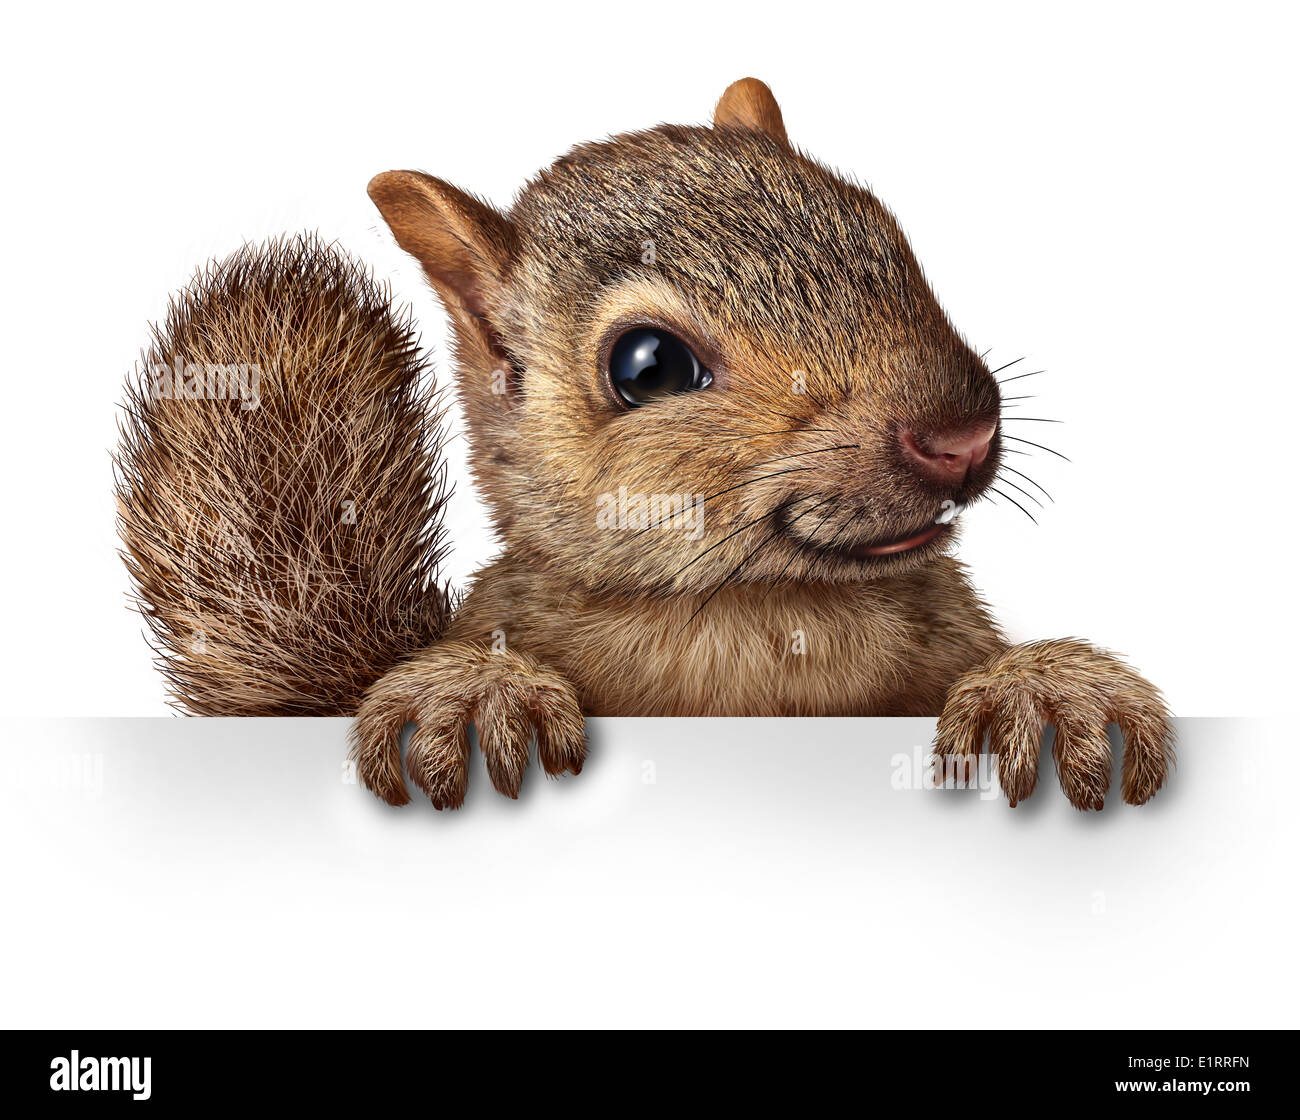 Cute squirrel hanging over a blank banner sign with copy space as a friendly cute furry rodent character gripping a billboard signage for advertising and marketing as a message from animal wildlife or backyard critters. Stock Photo